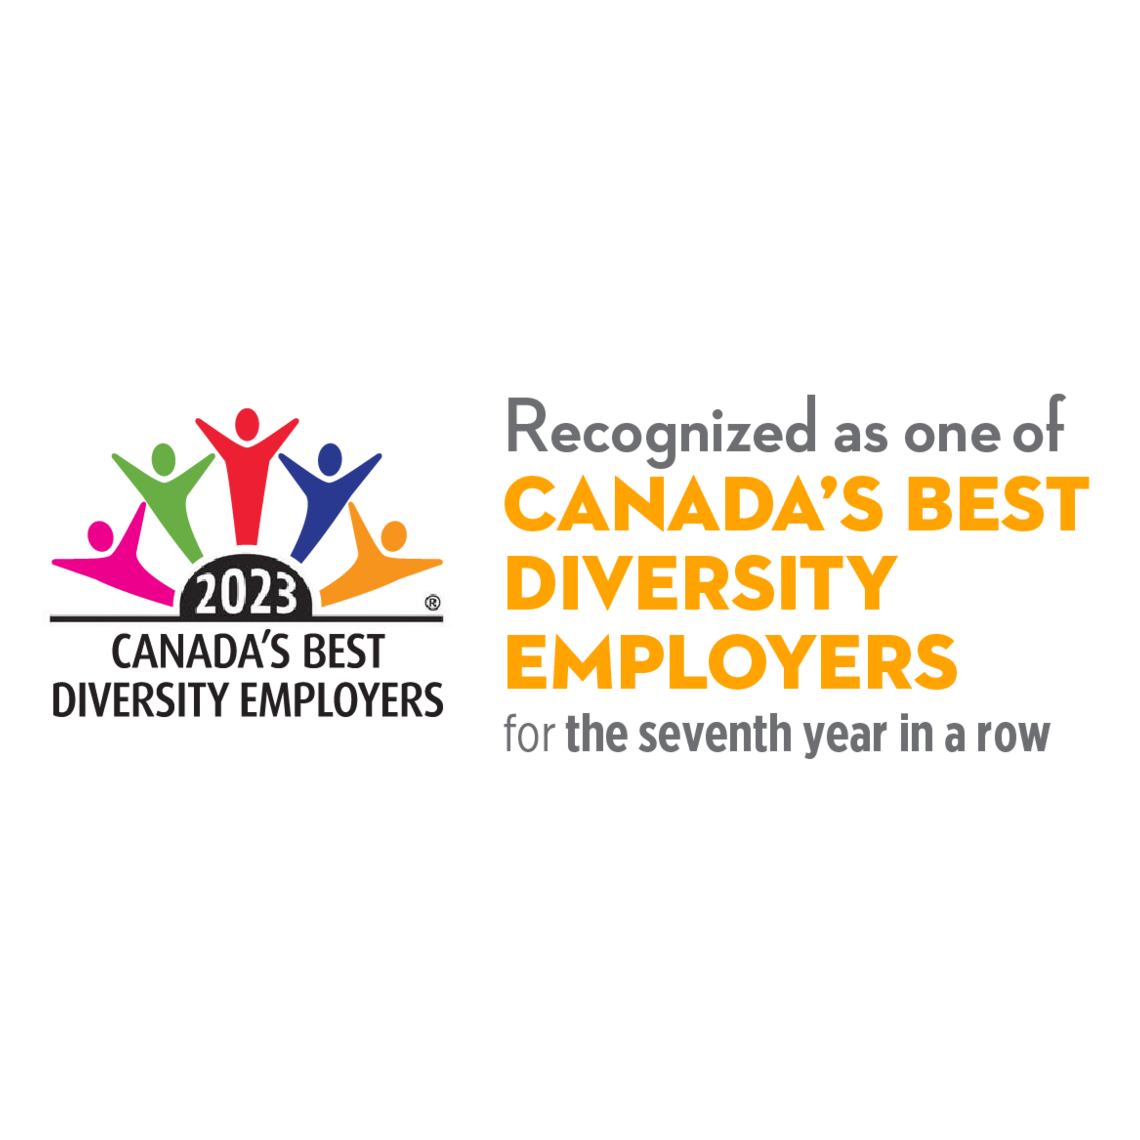 UCalgary is recognized as one of CANADA’S BEST DIVERSITY EMPLOYERS for the seventh year in a row in 2023